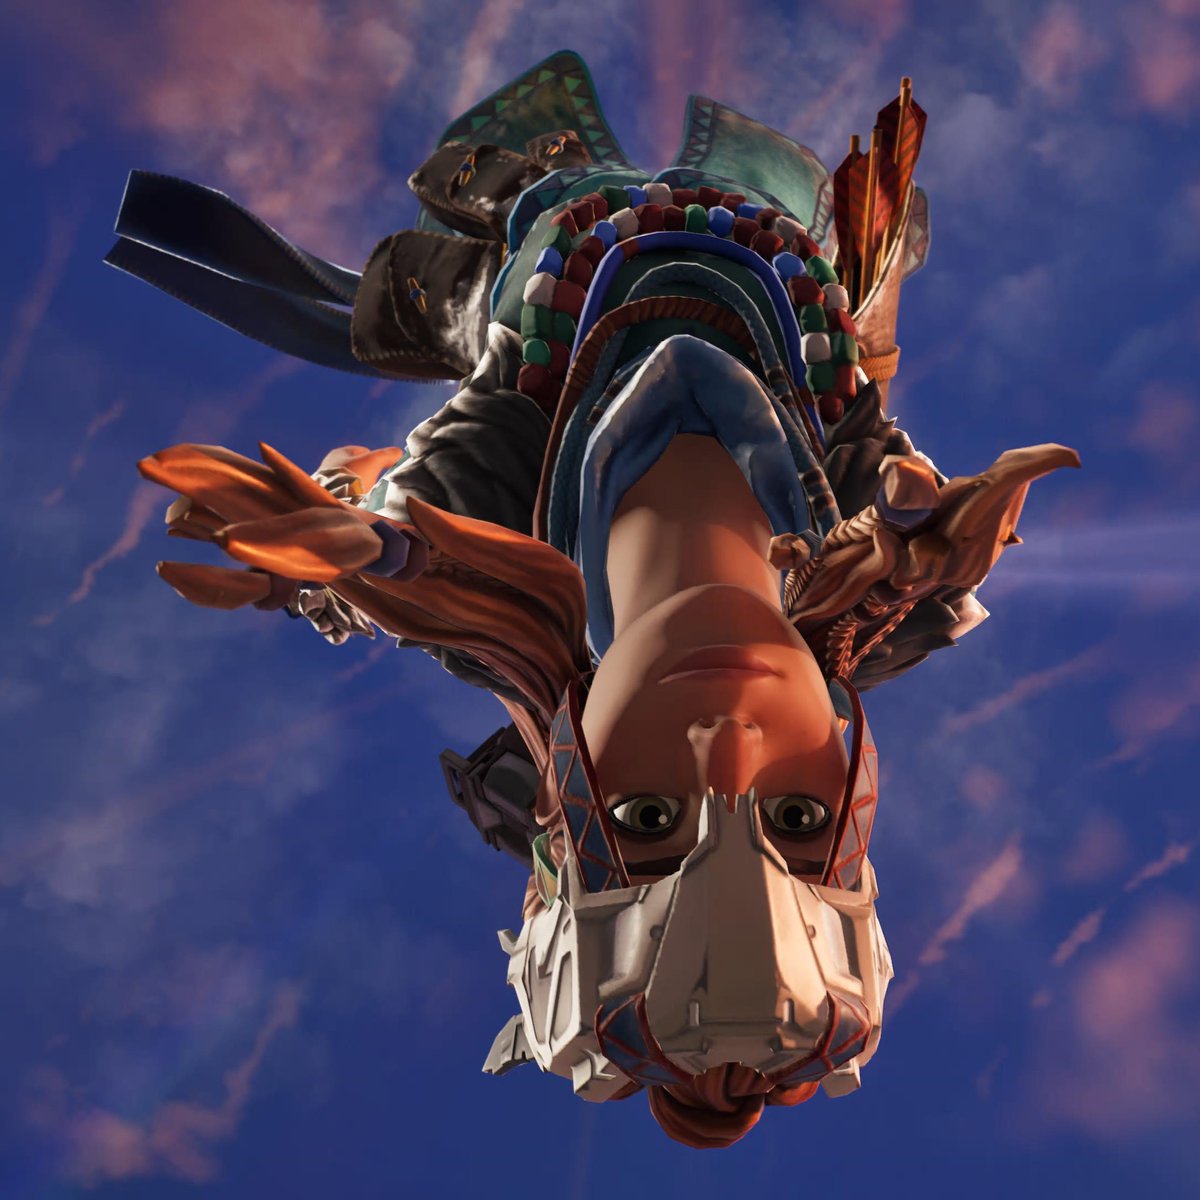 [Free Fallin]
Game: #Fortnite #HorizonZeroDawn #PS5
Tags: #Fortography #Aloy #WIGVP #AloyCloseUpVP #WVPPortrait #TheMoodChallenge #VirtualPhotography #VPRT #LandofVP #TheCapturedCollective #ArtisticofSociety #VPCollective #VPGamers #ThePhotoMode #SVP #VPCONTEXT #VPGraph #VPTweet